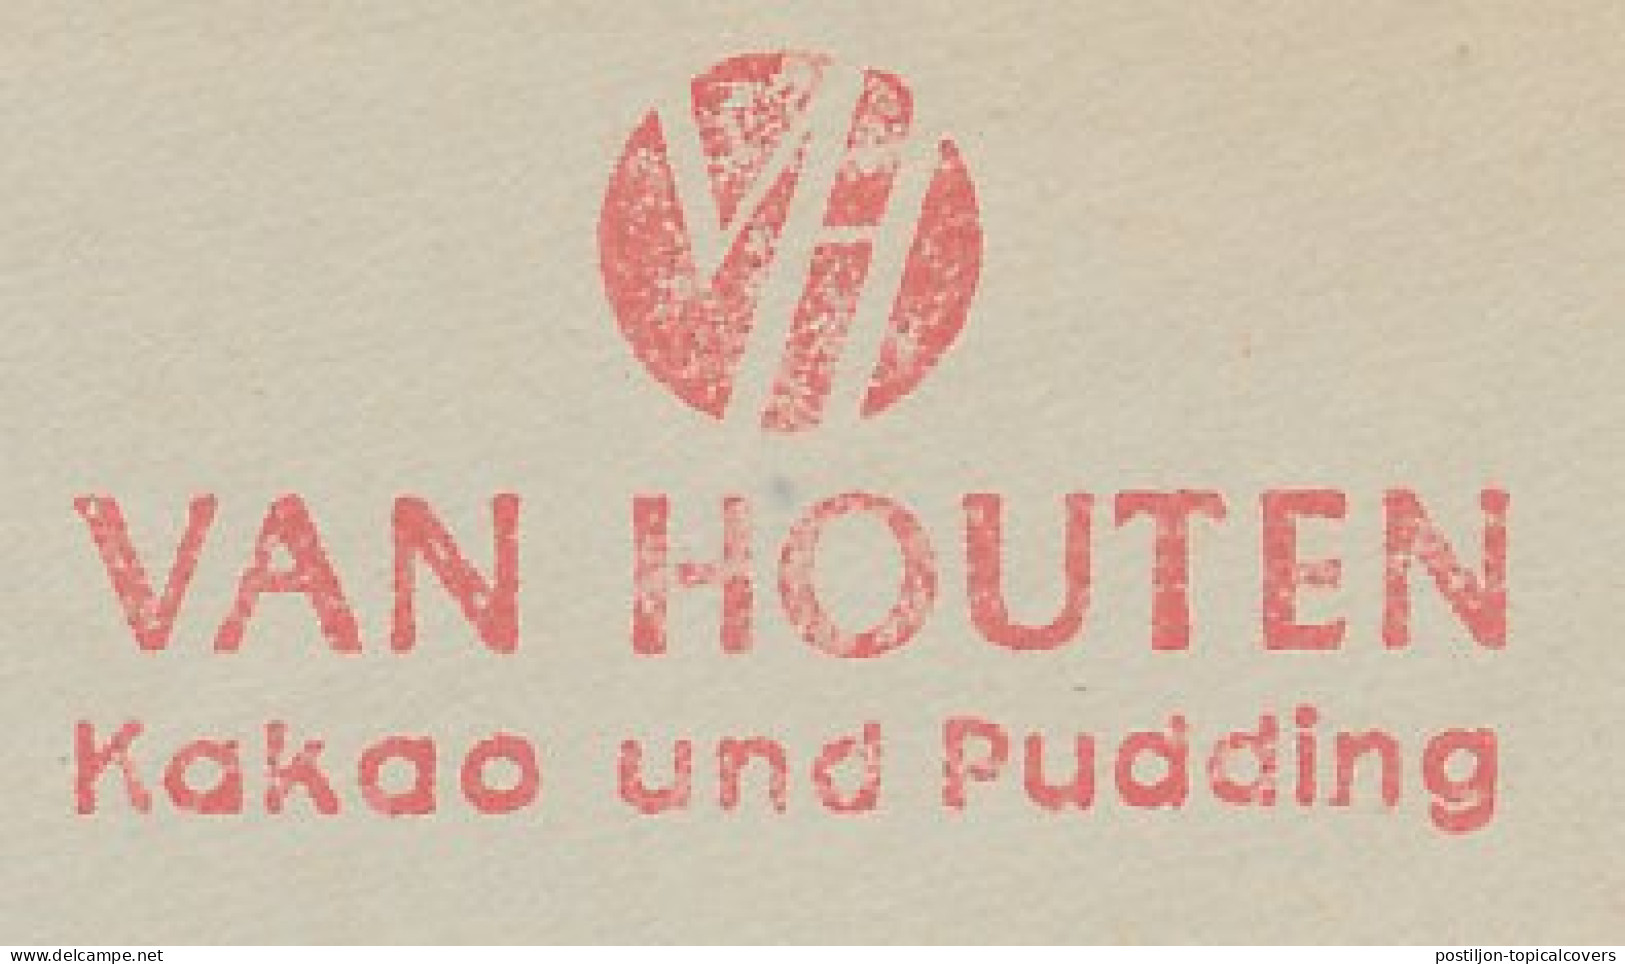 Meter Top Cut Germany 1952 Cacao - Pudding - Van Houten - Alimentation